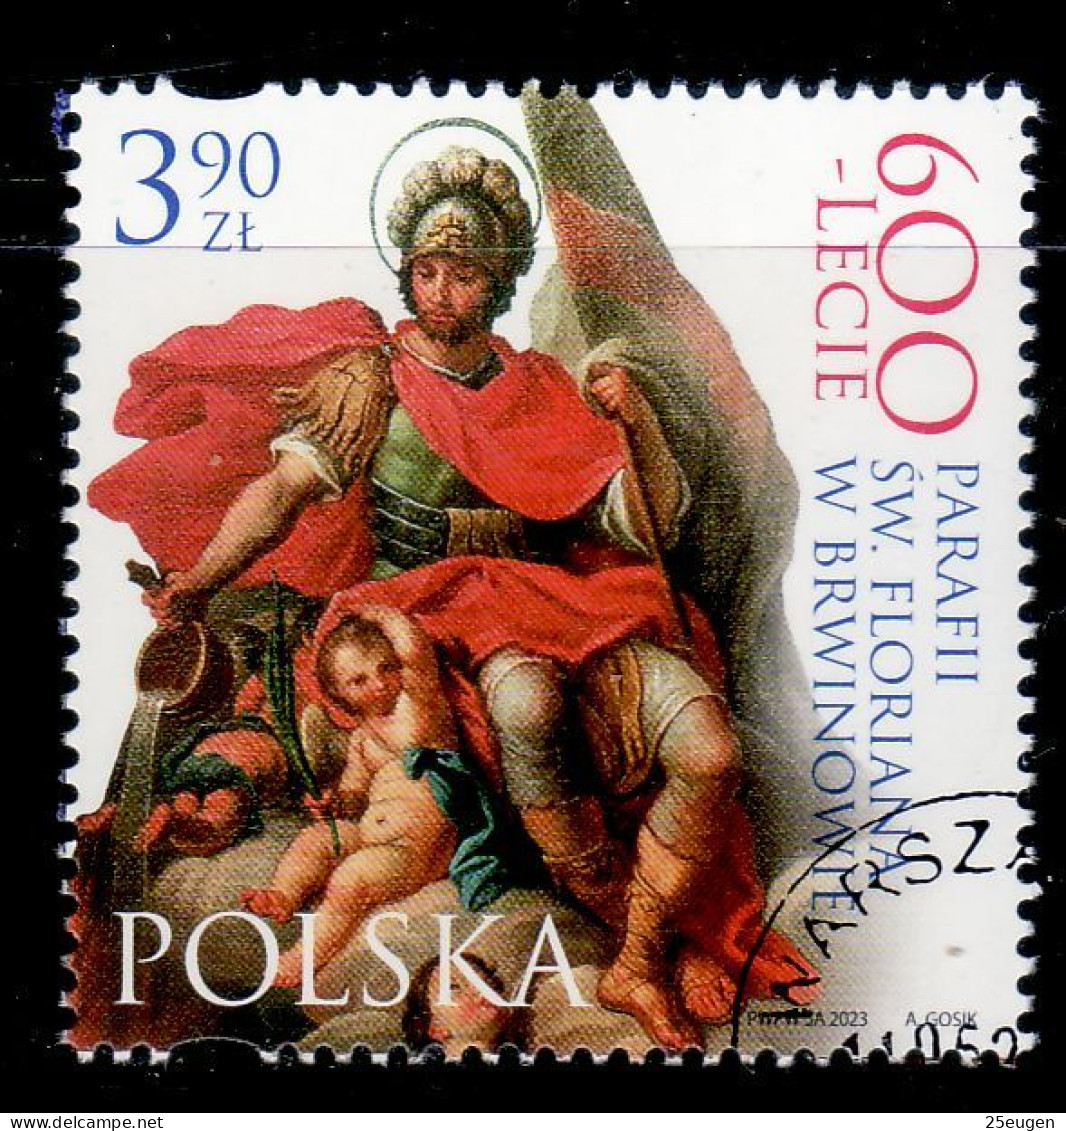 POLAND 2023  600th Anniversary Of The Parish Of St. Florian In Brwinów  USED - Usados